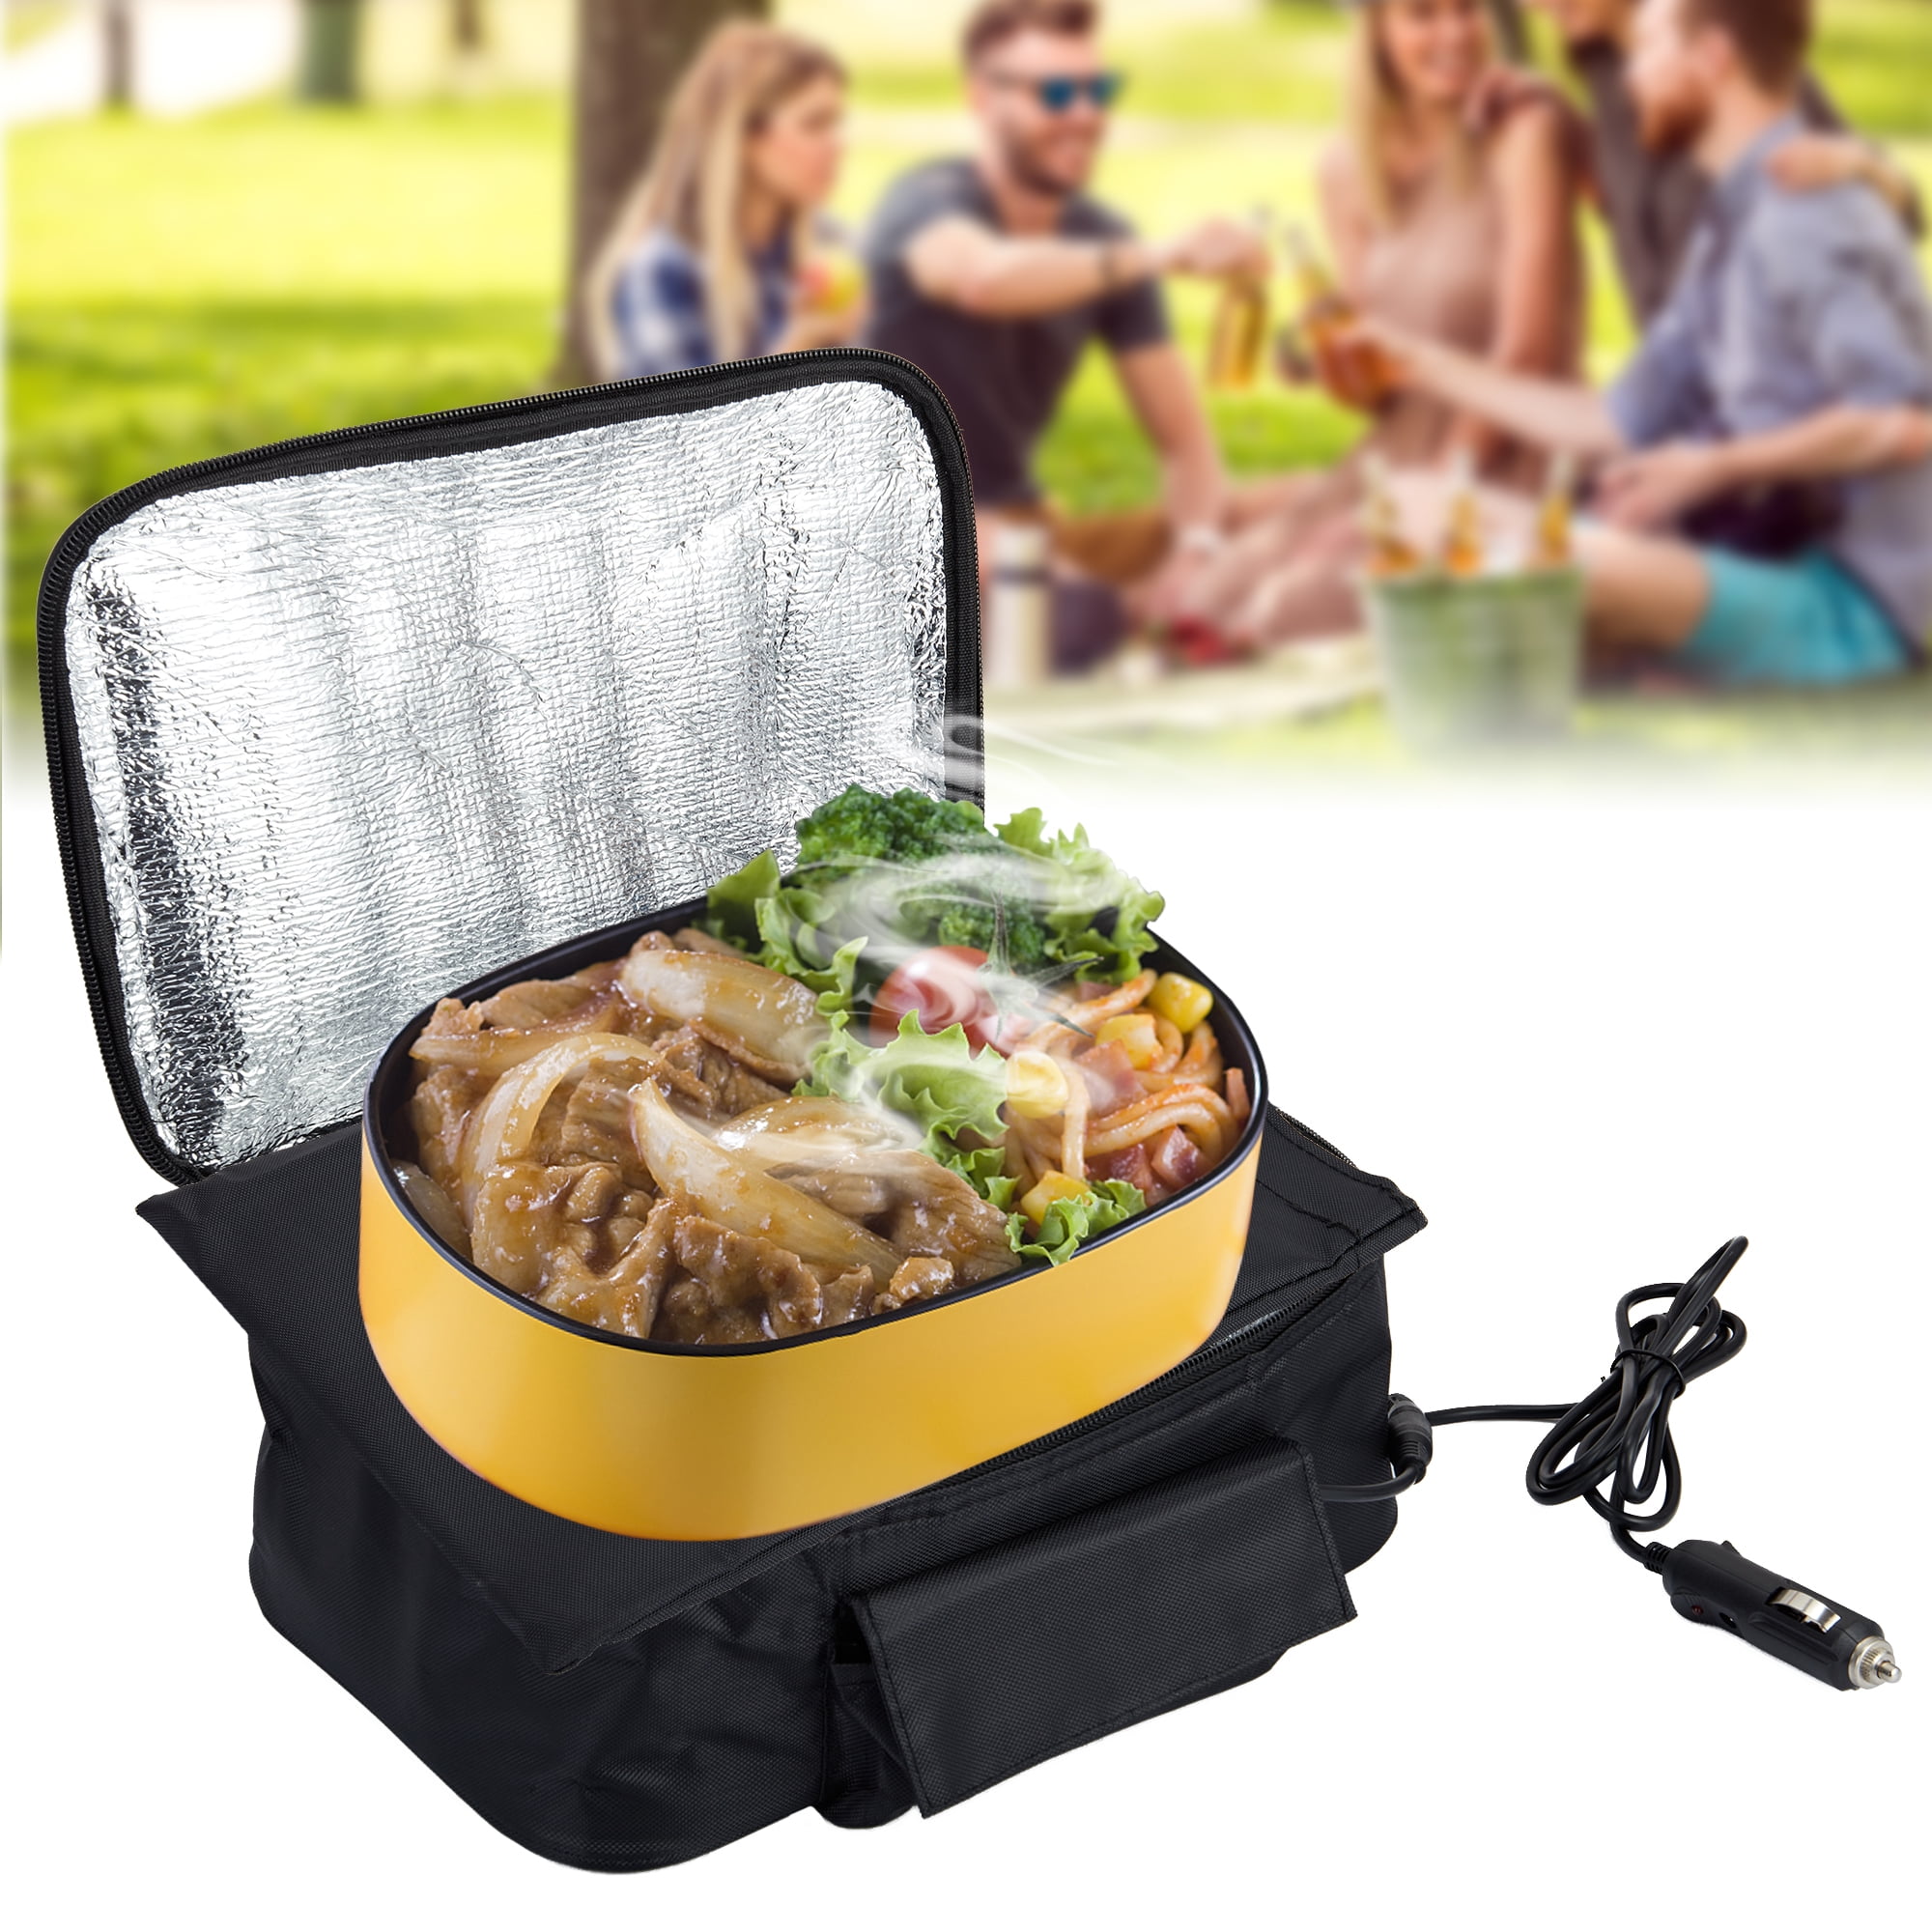  VAJOOCLL 12V Electric Lunch Box for Car Food Warmer 110W Mini  Portable Oven for Business Trip/Fishing/Family Travel/Camping/Picnic，Mini  Oven for Meals Reheat: Home & Kitchen